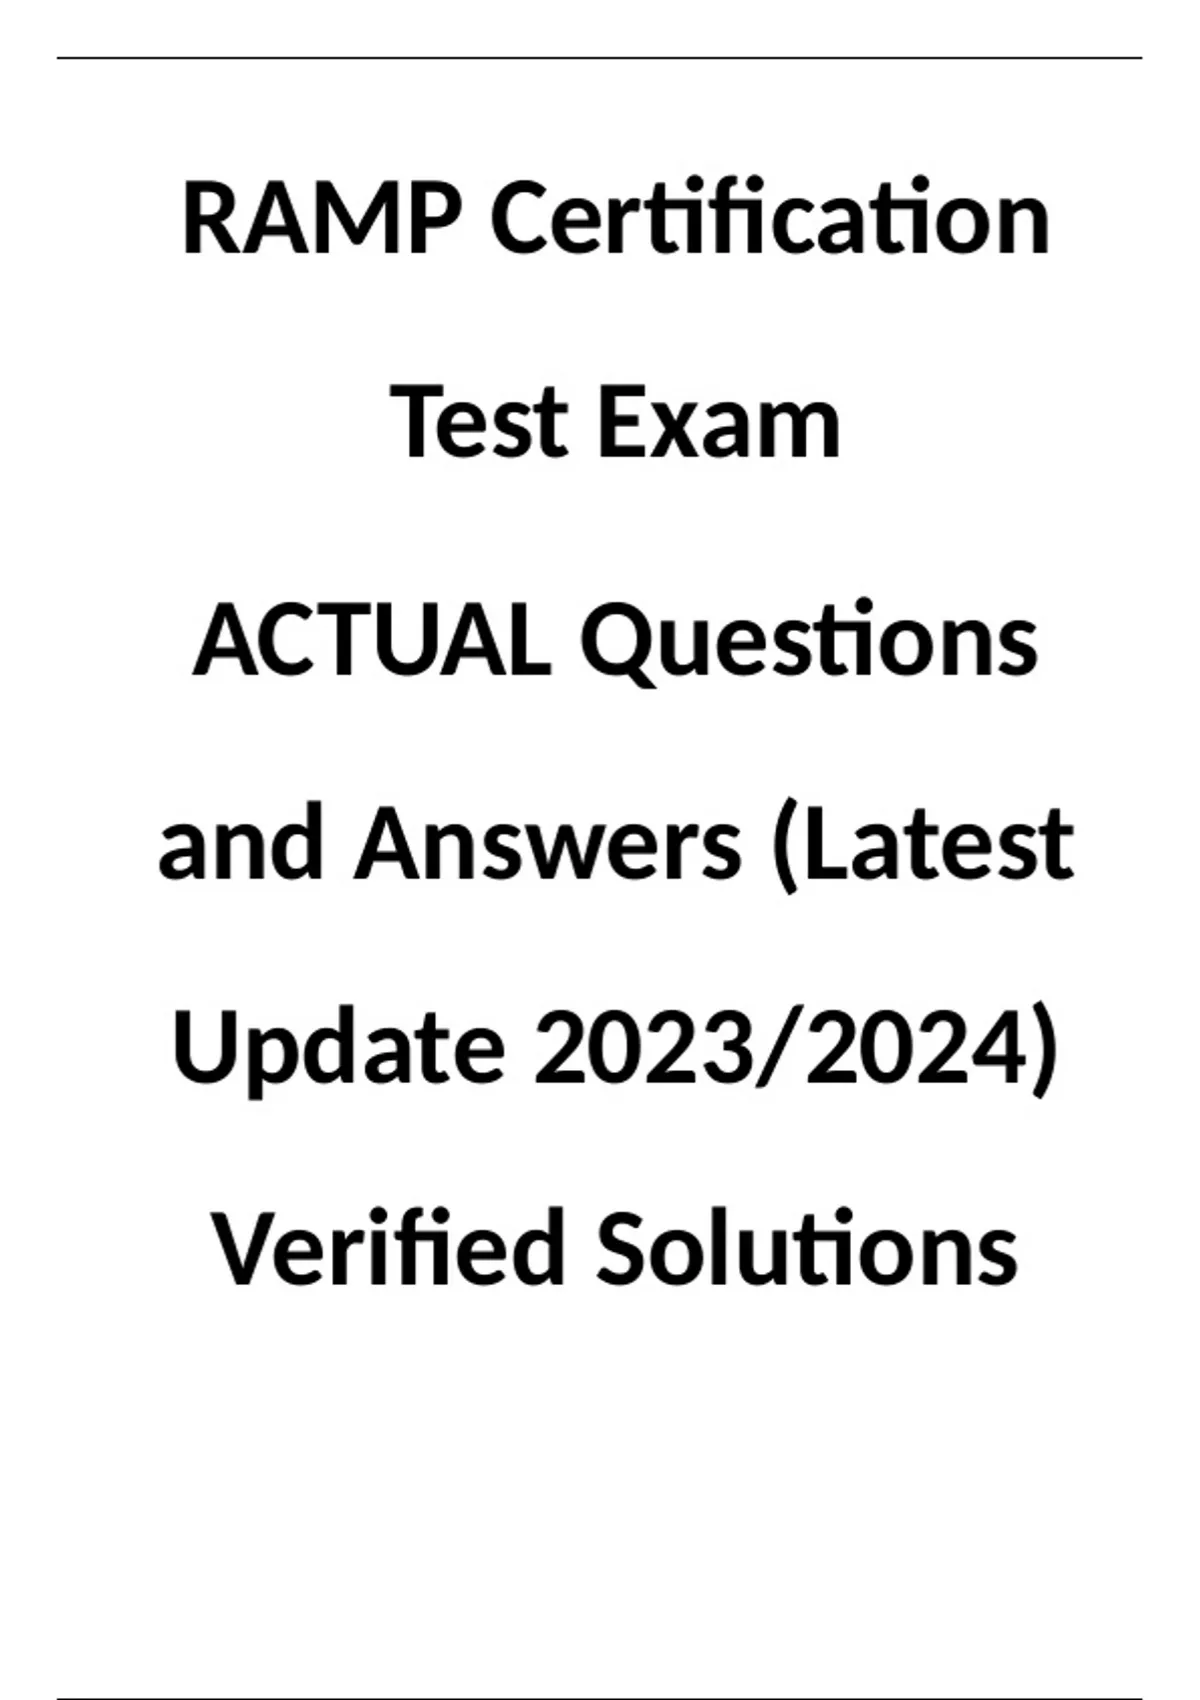 RAMP Certification Test Exam ACTUAL Questions and Answers (Latest